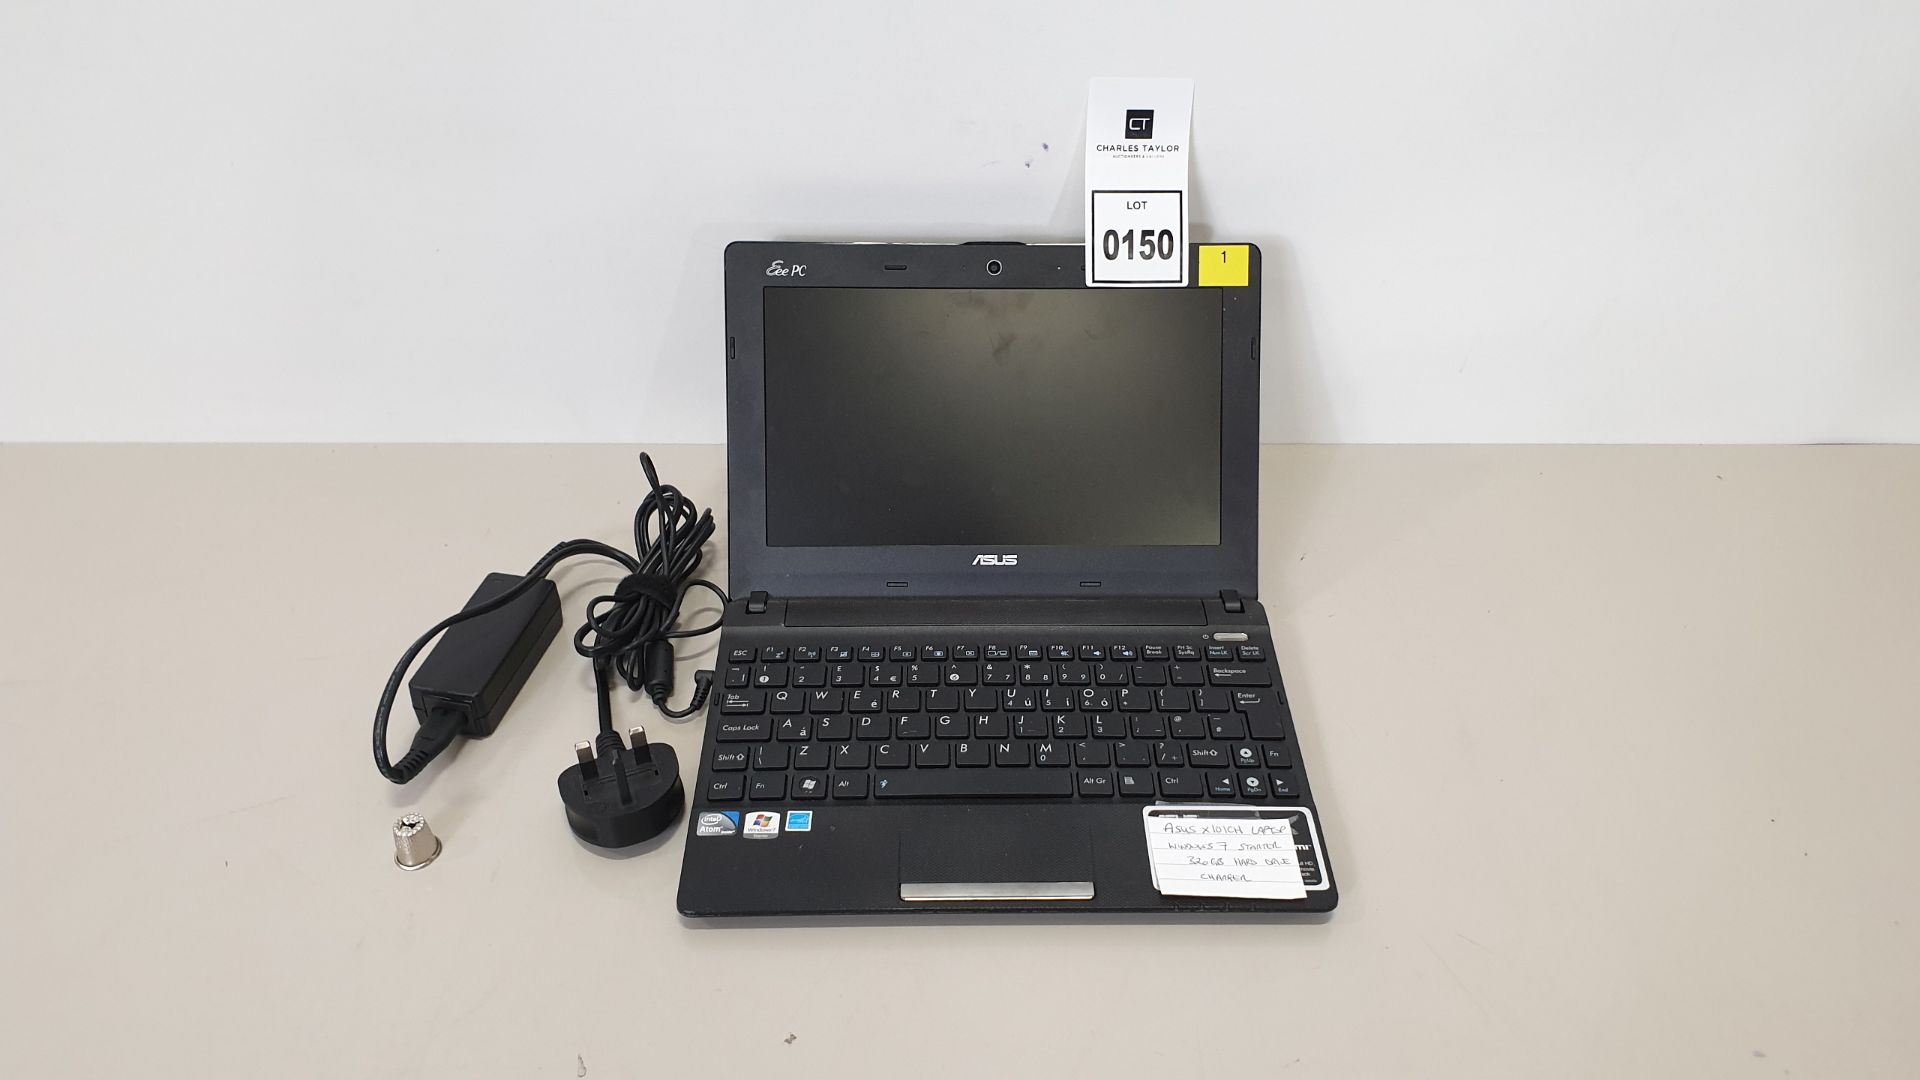 ASUS X 101CH LAPTOP WINDOWS 7 STARTER 320GB HARD DRIVE - WITH CHARGER